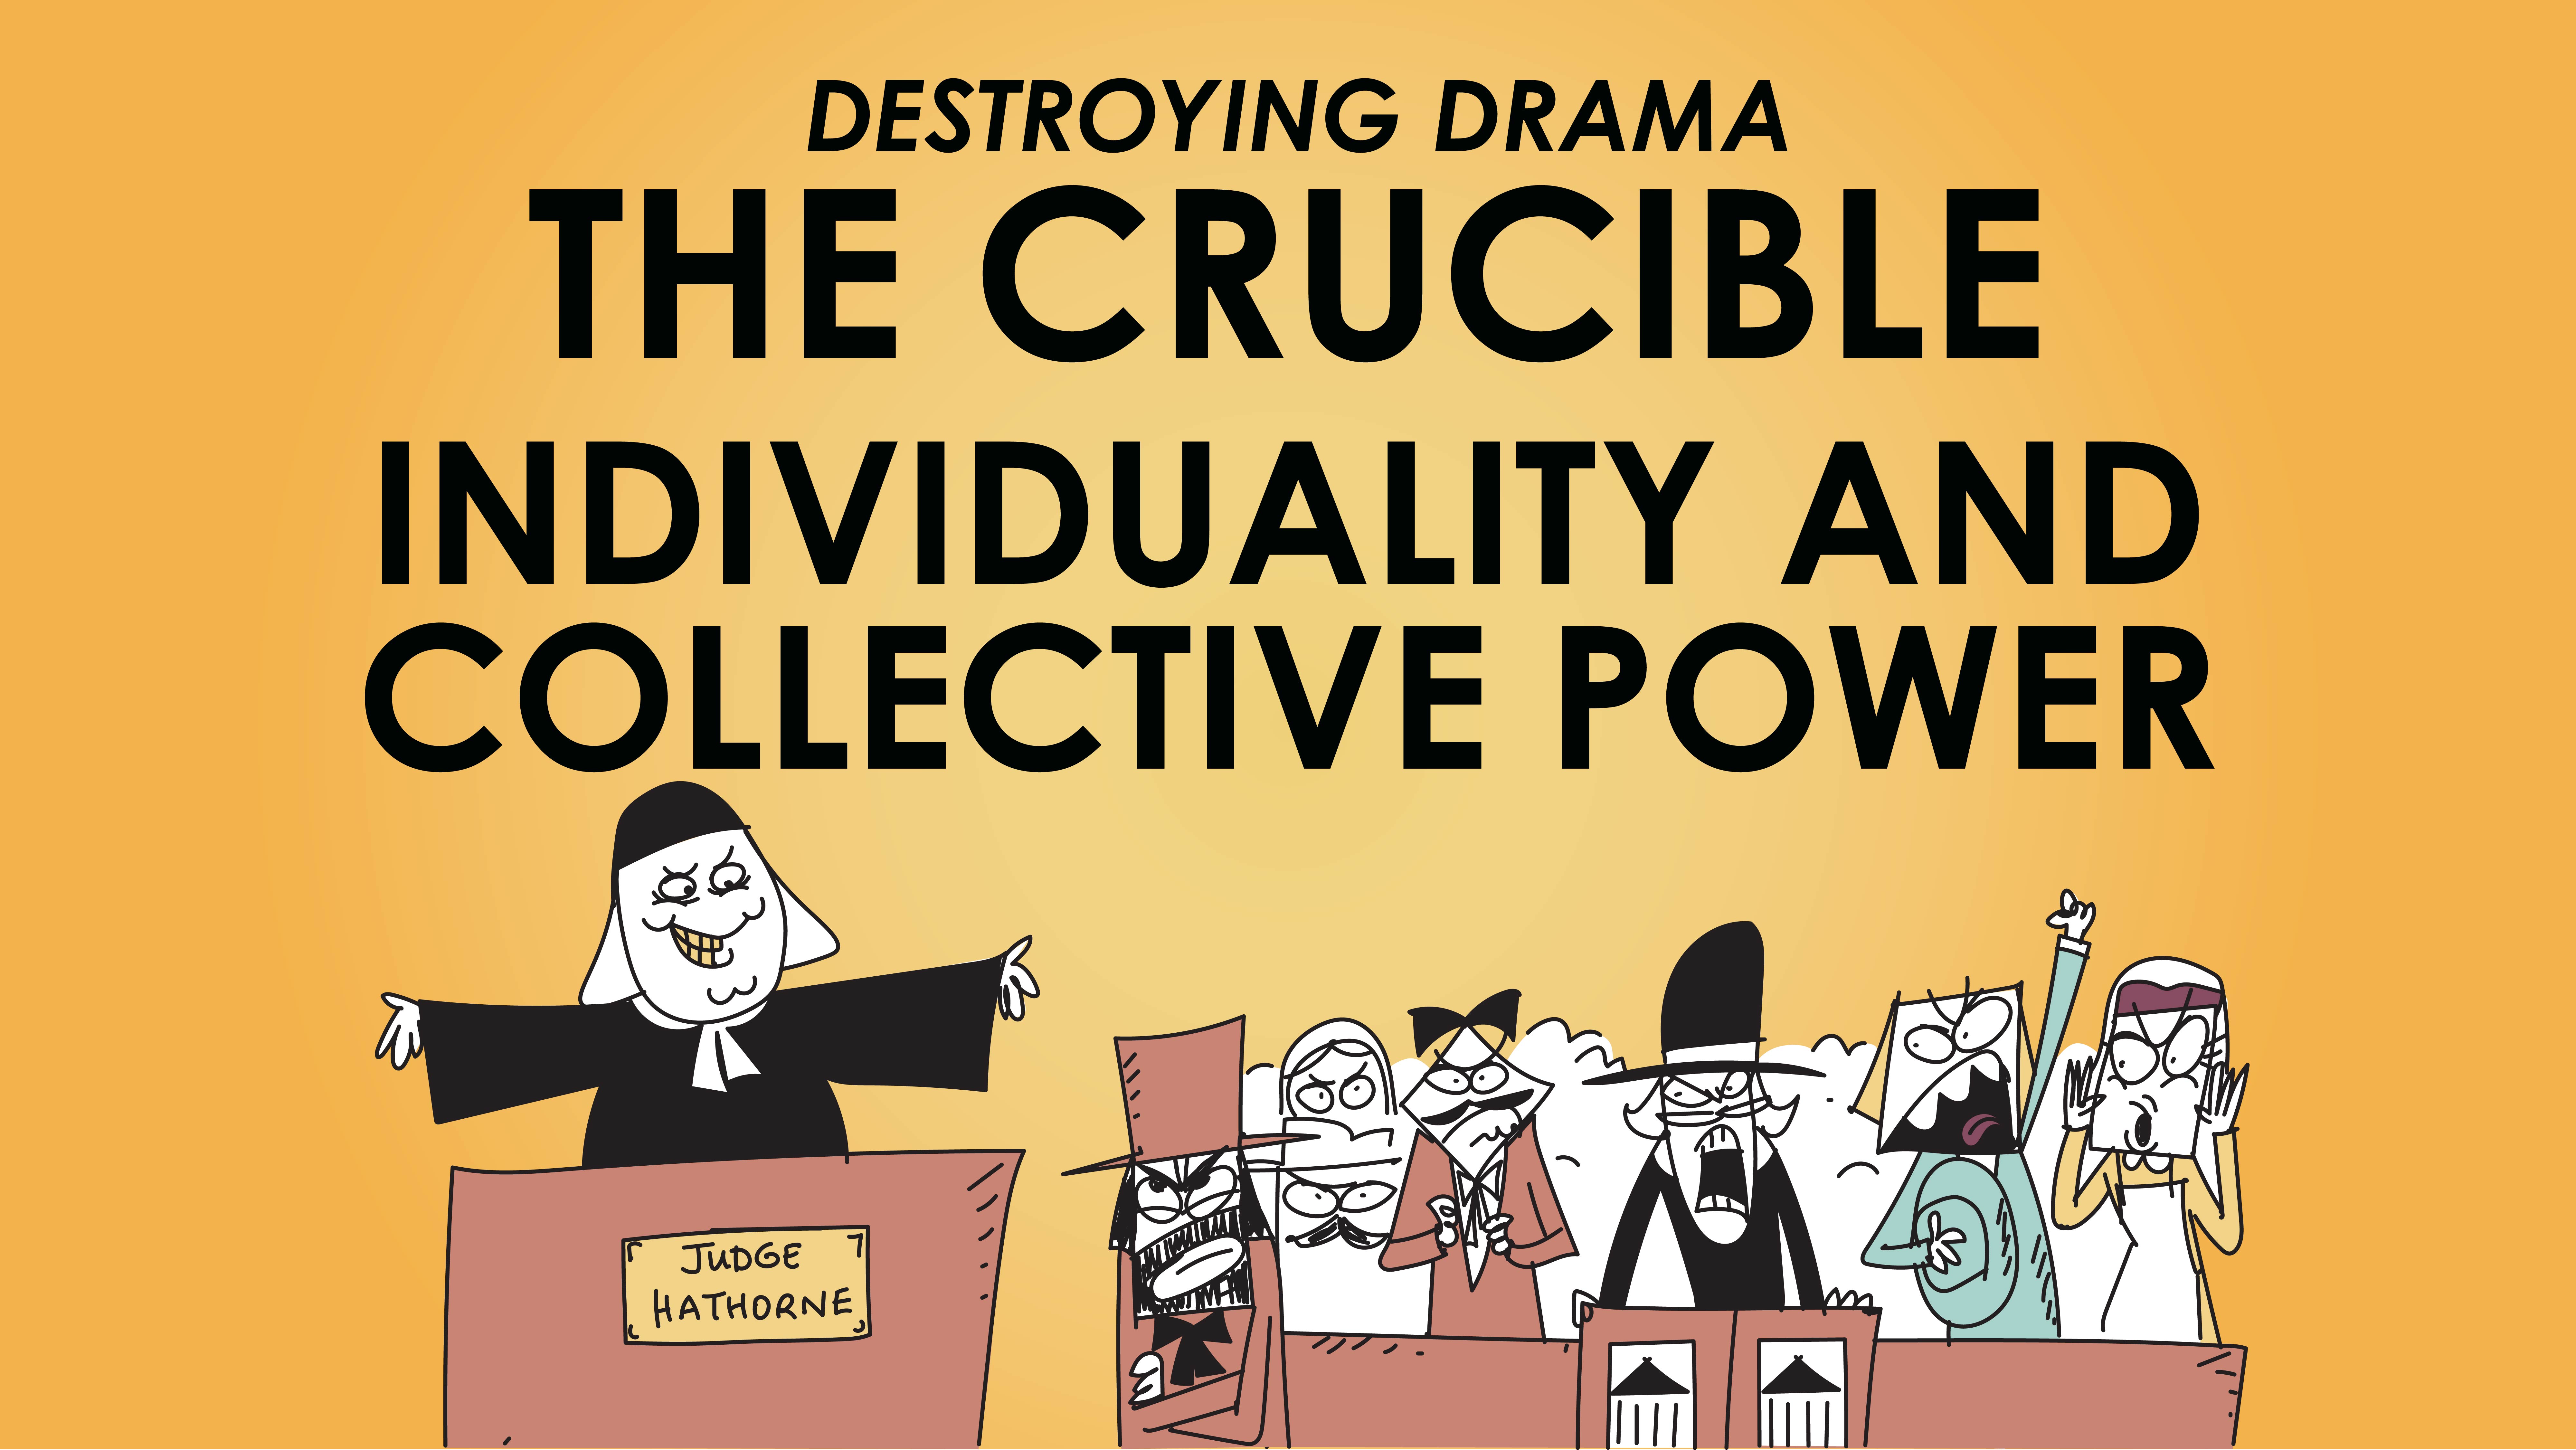 The Crucible - Arthur Miller - Theme of Individuality and Collective Power - Destroying Drama Series